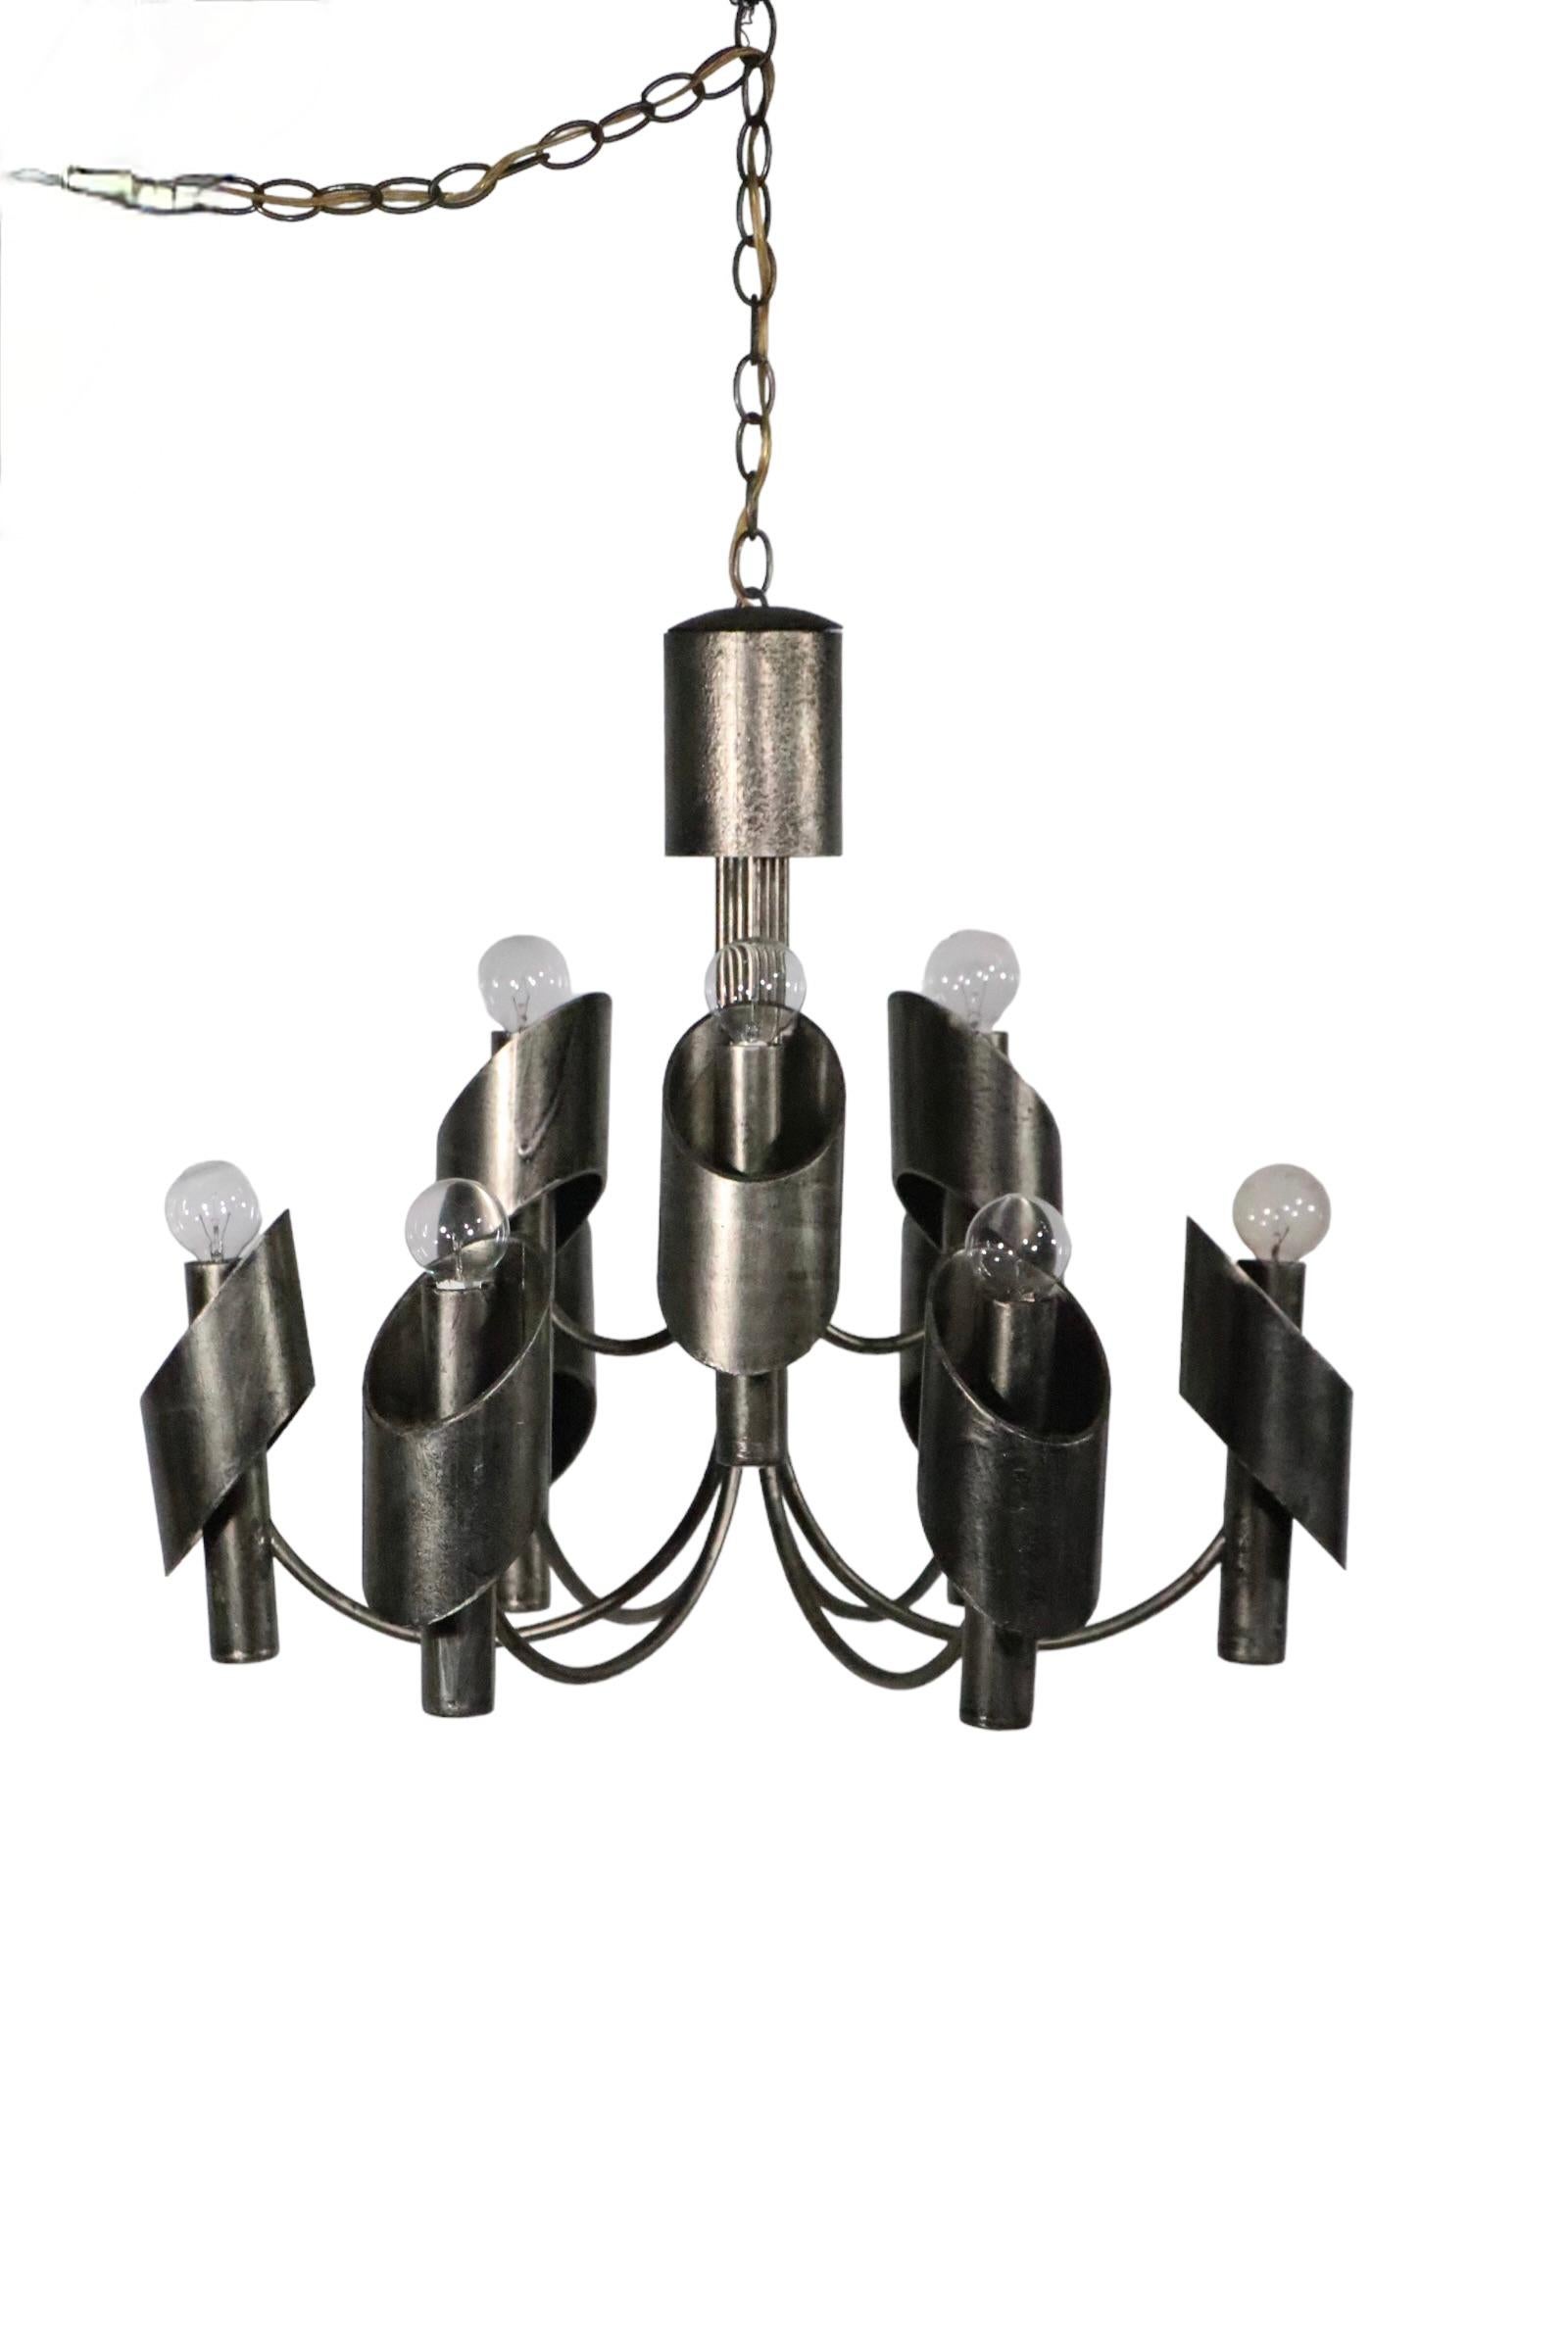 Exceptional Brutalist chandelier by Marcello Fantoni, circa 1970's. The fixture features nine uplight candle sockets, three interior and 6 exterior rings,  which surround the center point. The chandelier is circular ( 24.5 in Dia. x 21 in. H ) and